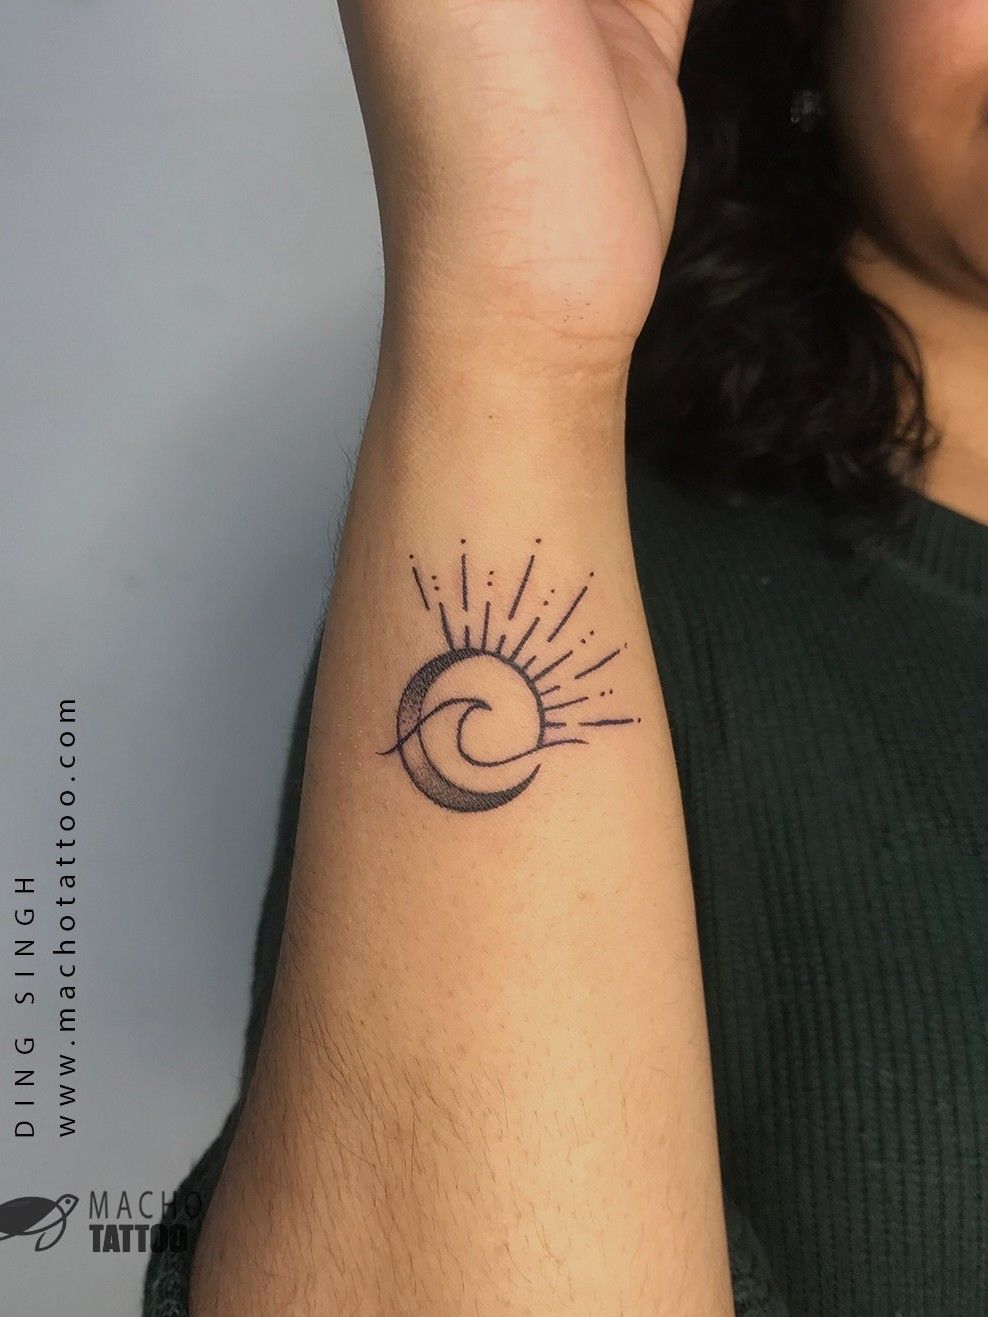 11 Minimalist Moon Tattoo Ideas You'll Want For Your First Tattoo |  Preview.ph